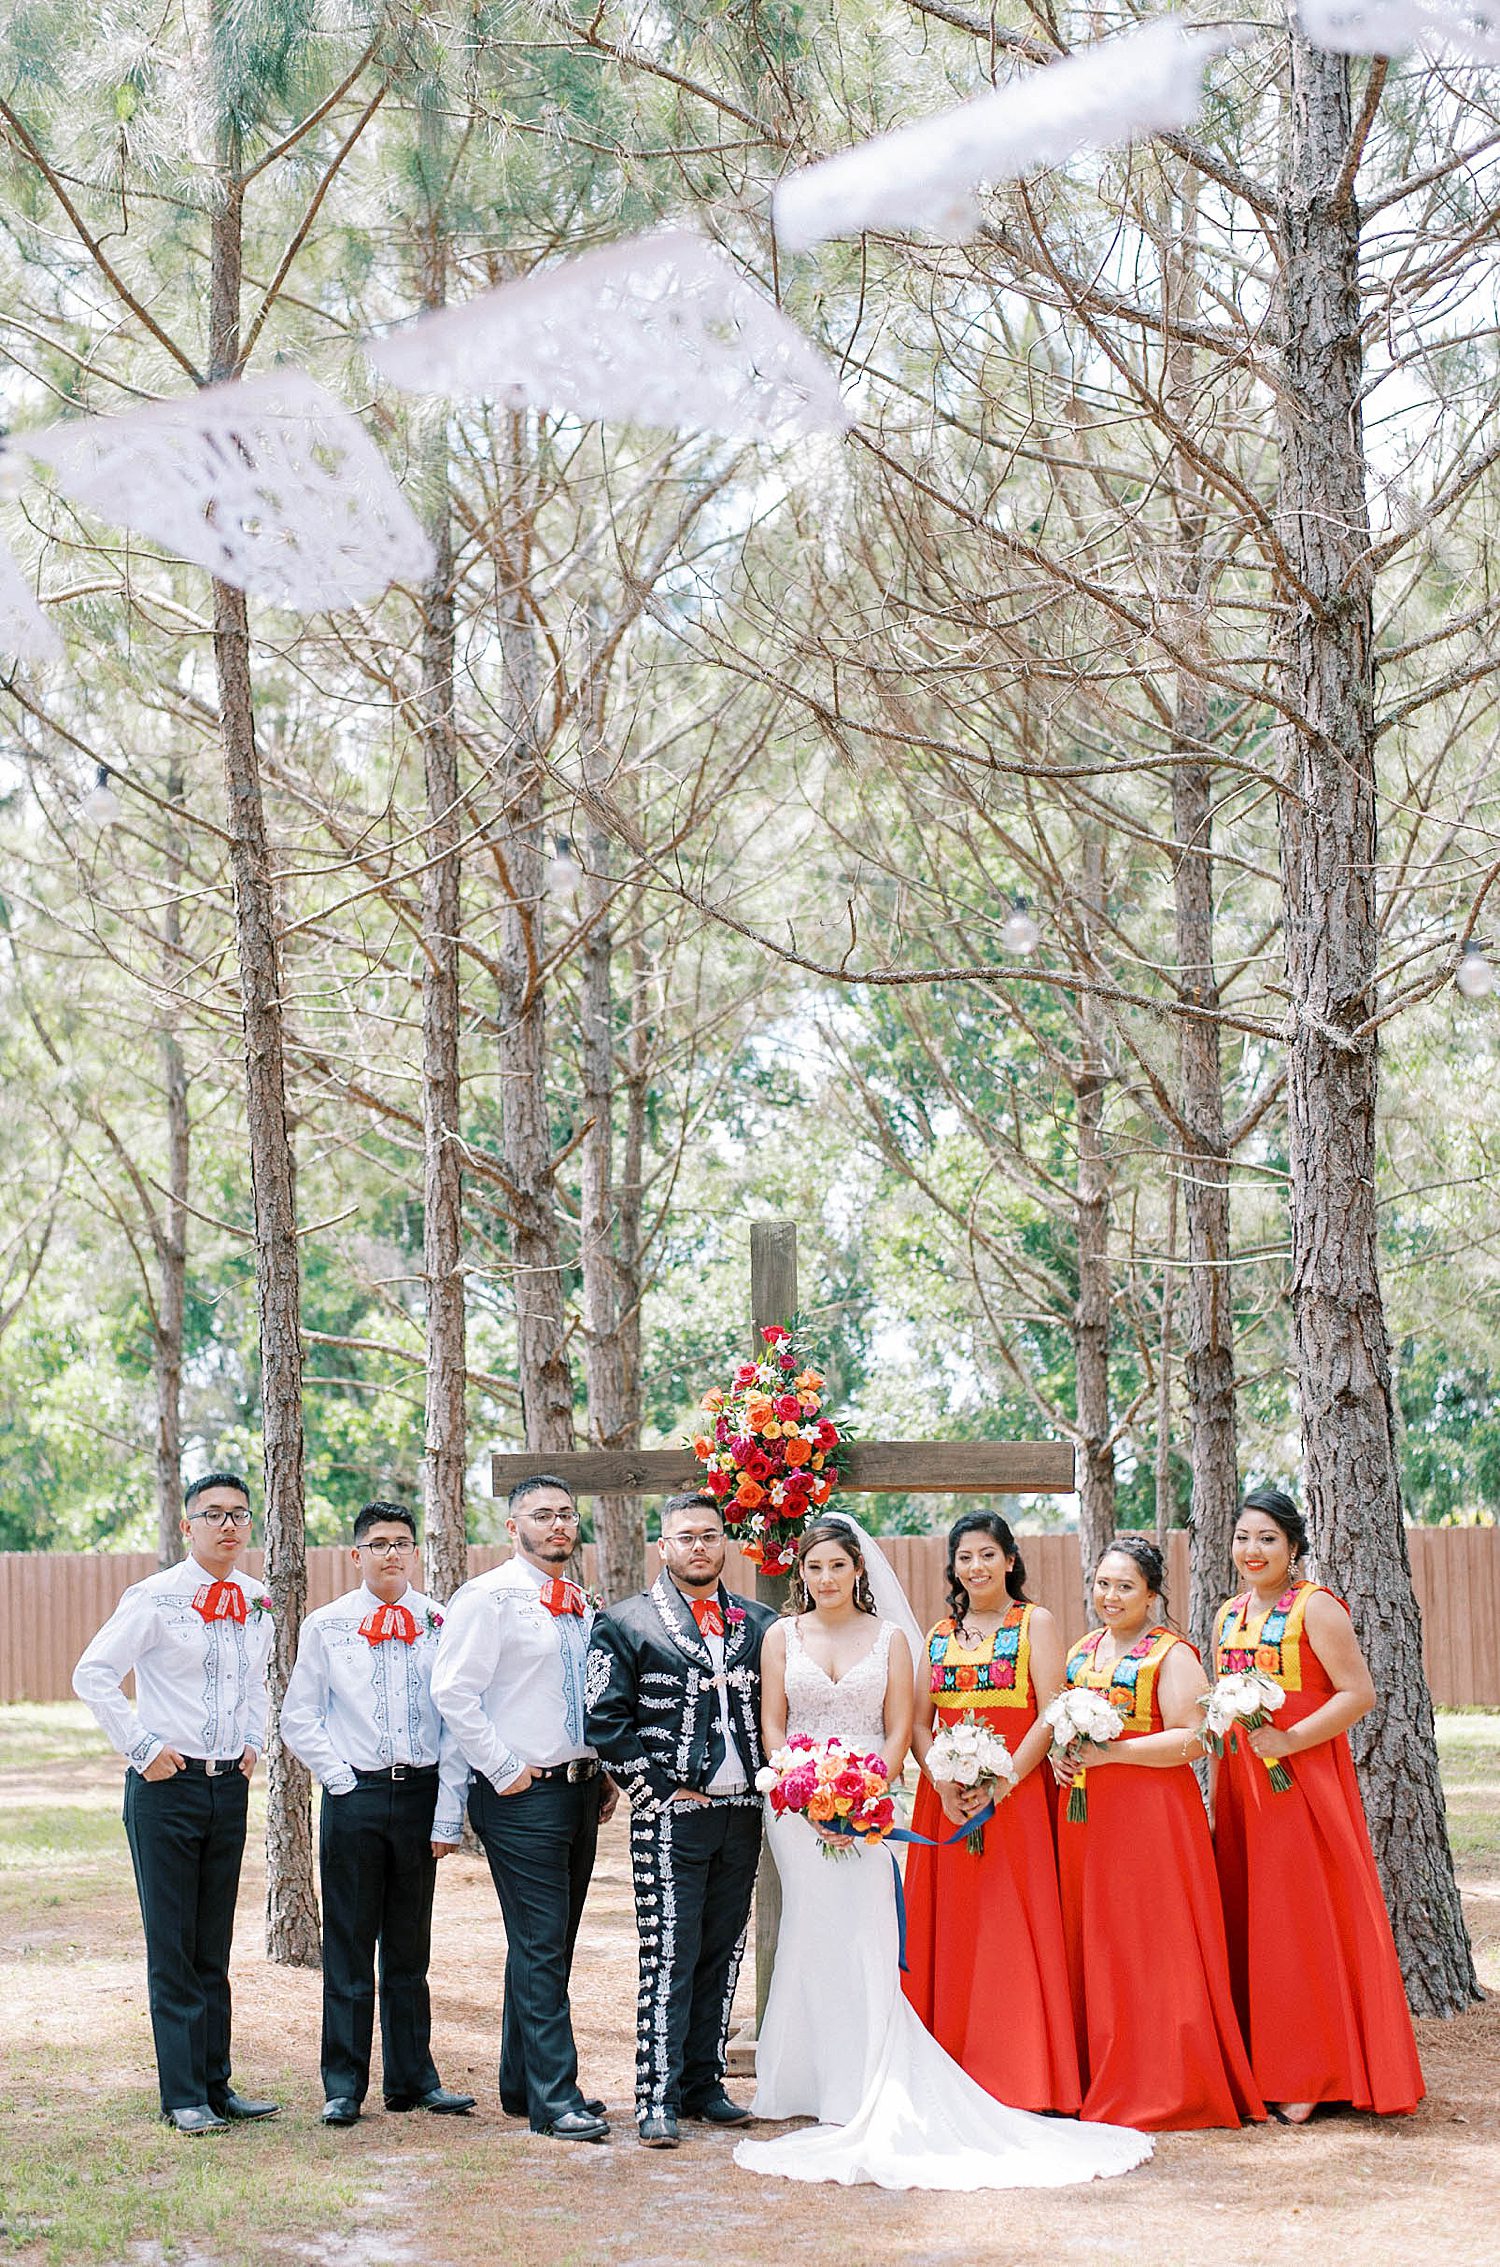 newlyweds stand with wedding party in colorful Mexican dresses